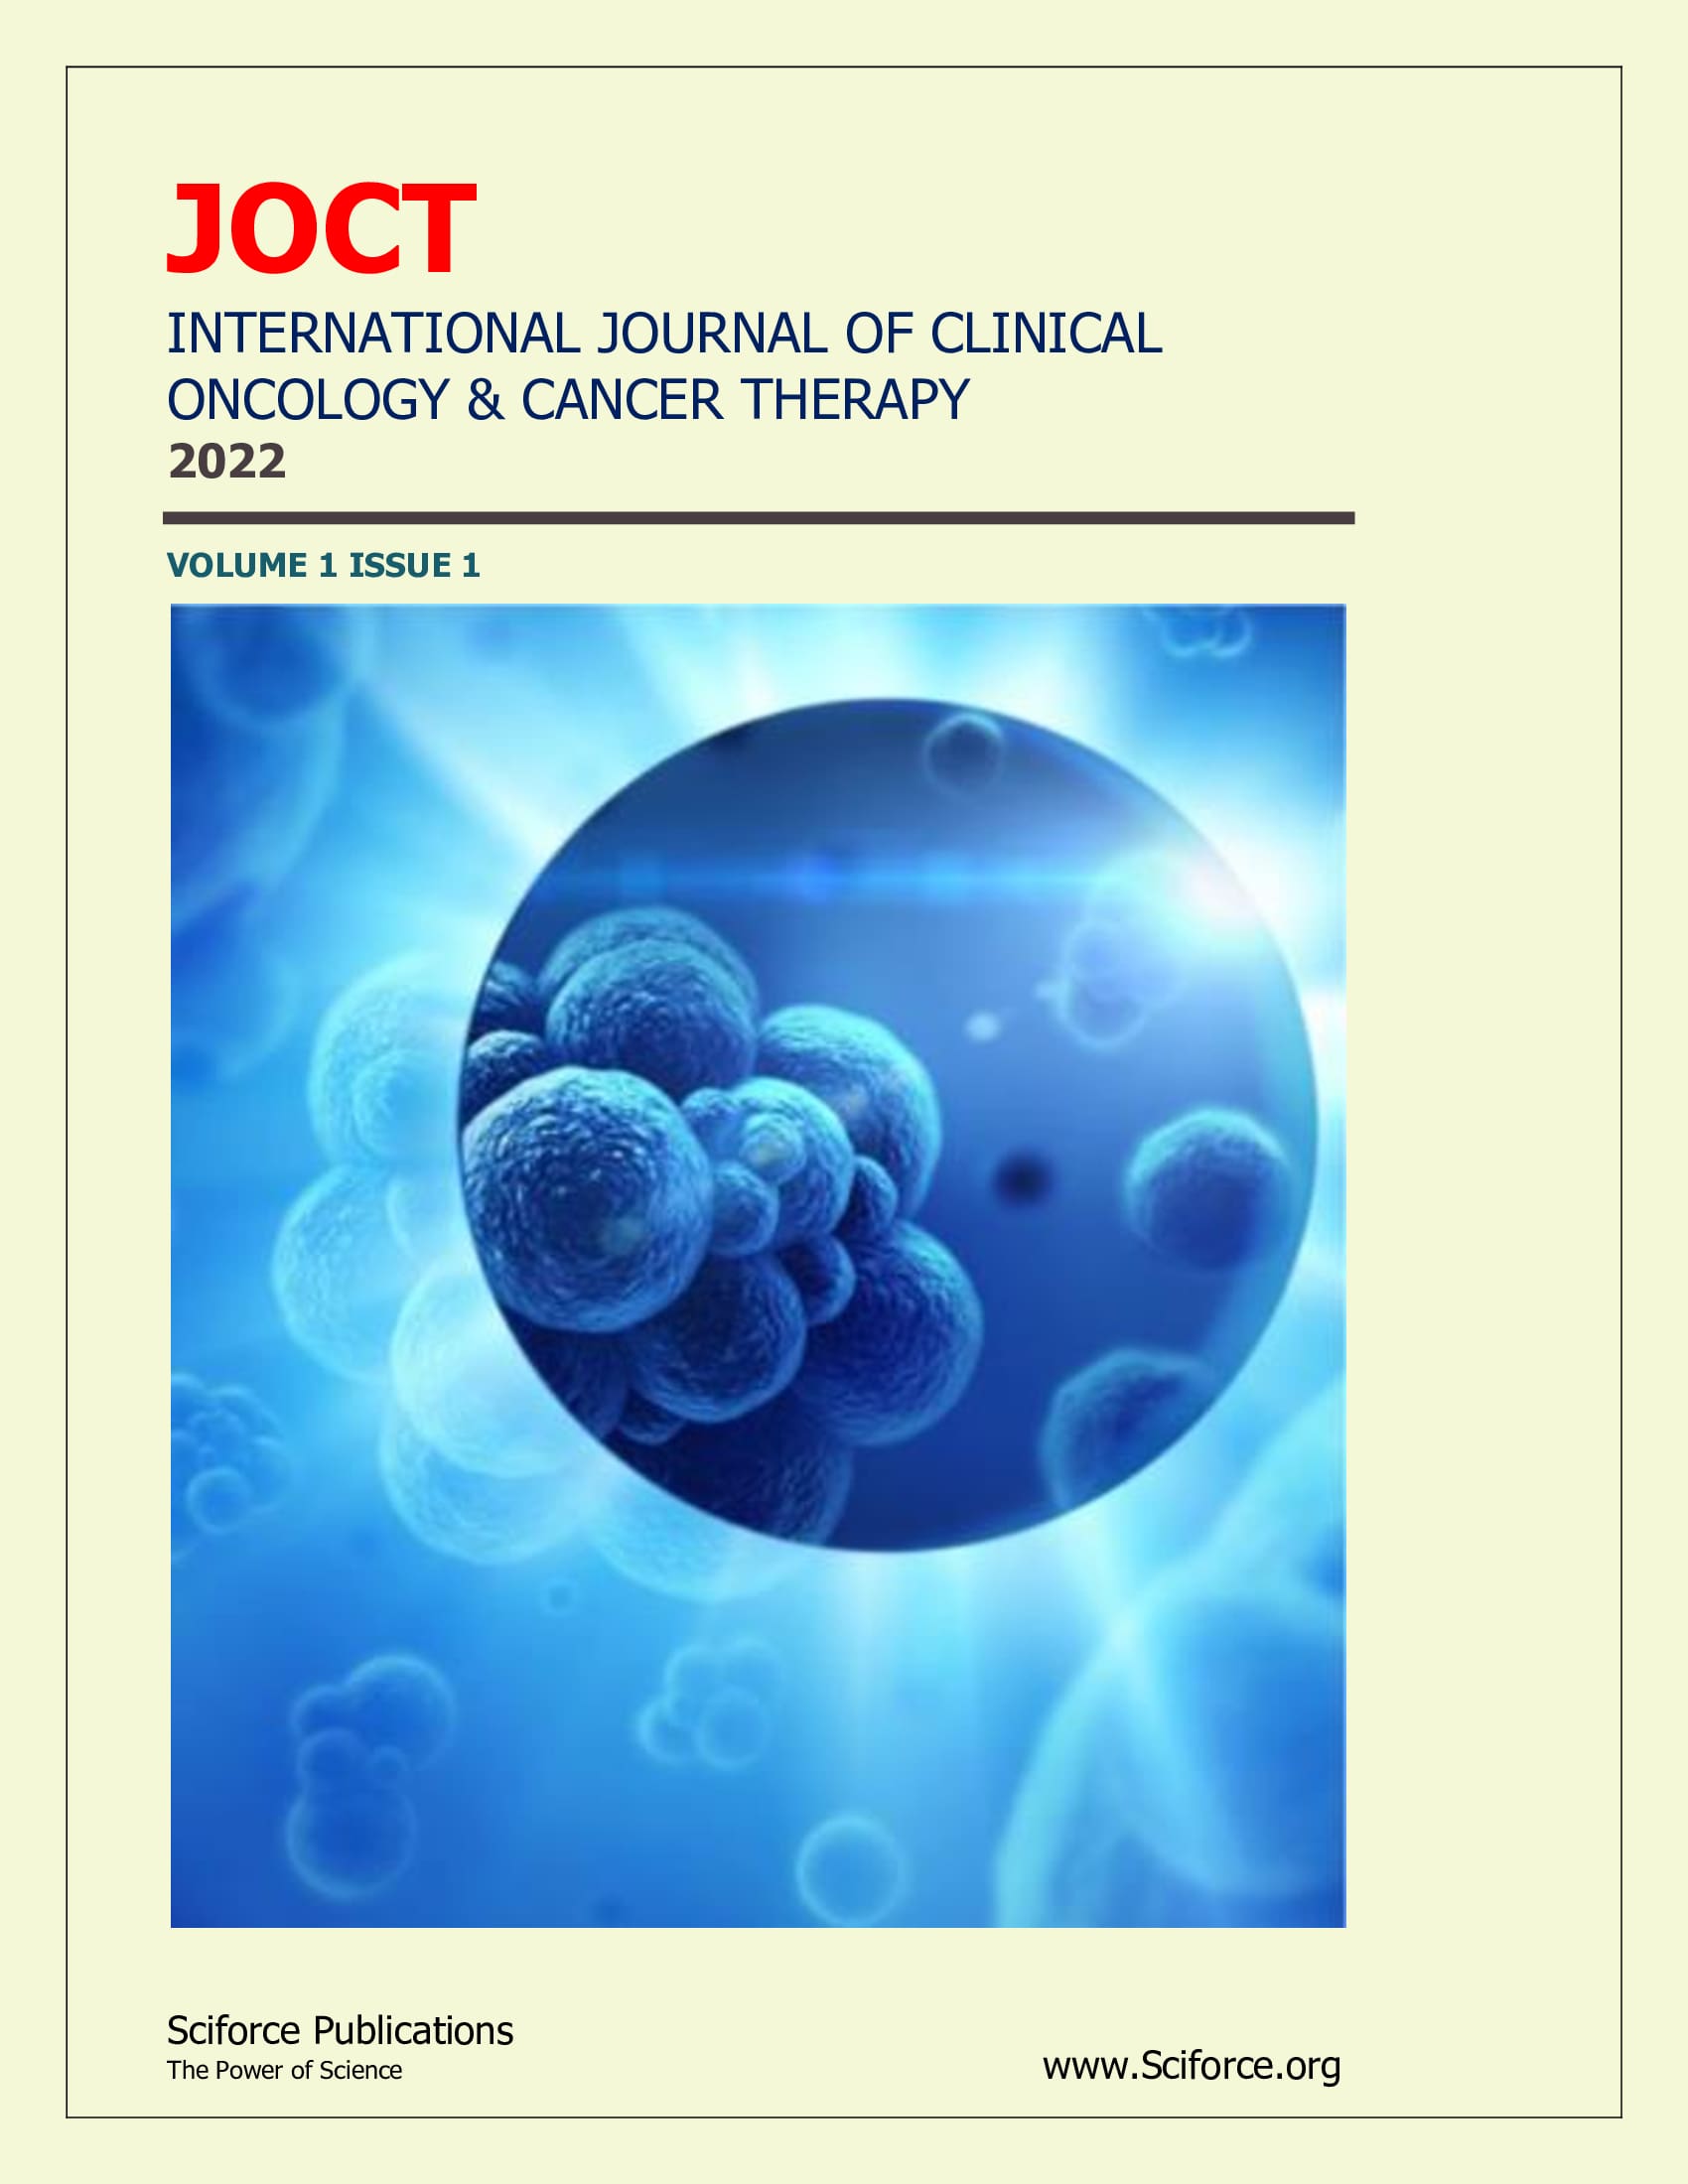 Journal of Clinical Oncology and Cancer Therapy